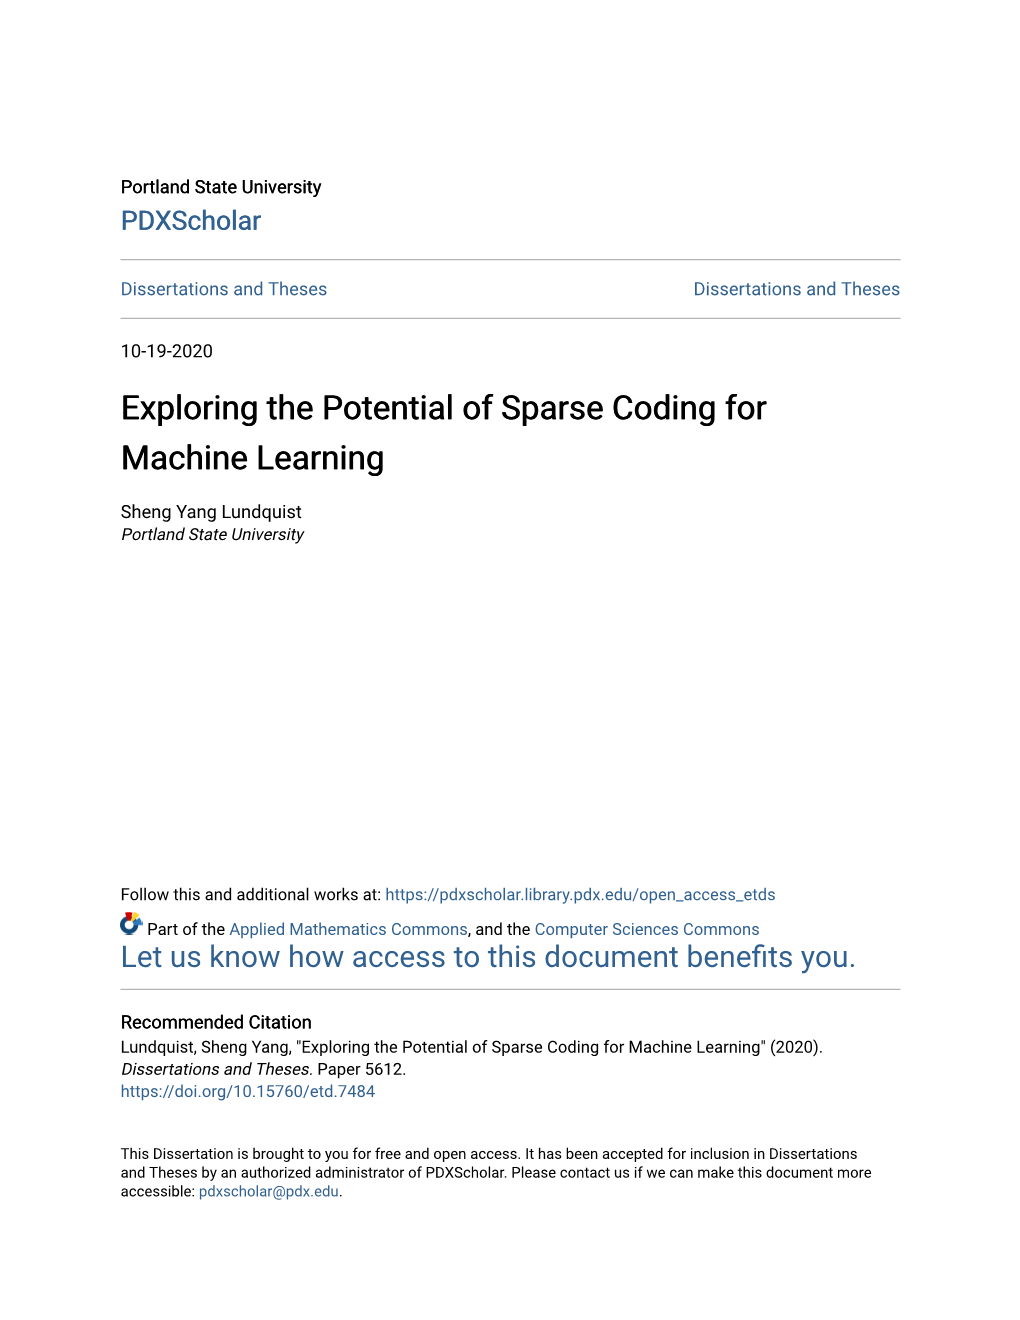 Exploring the Potential of Sparse Coding for Machine Learning